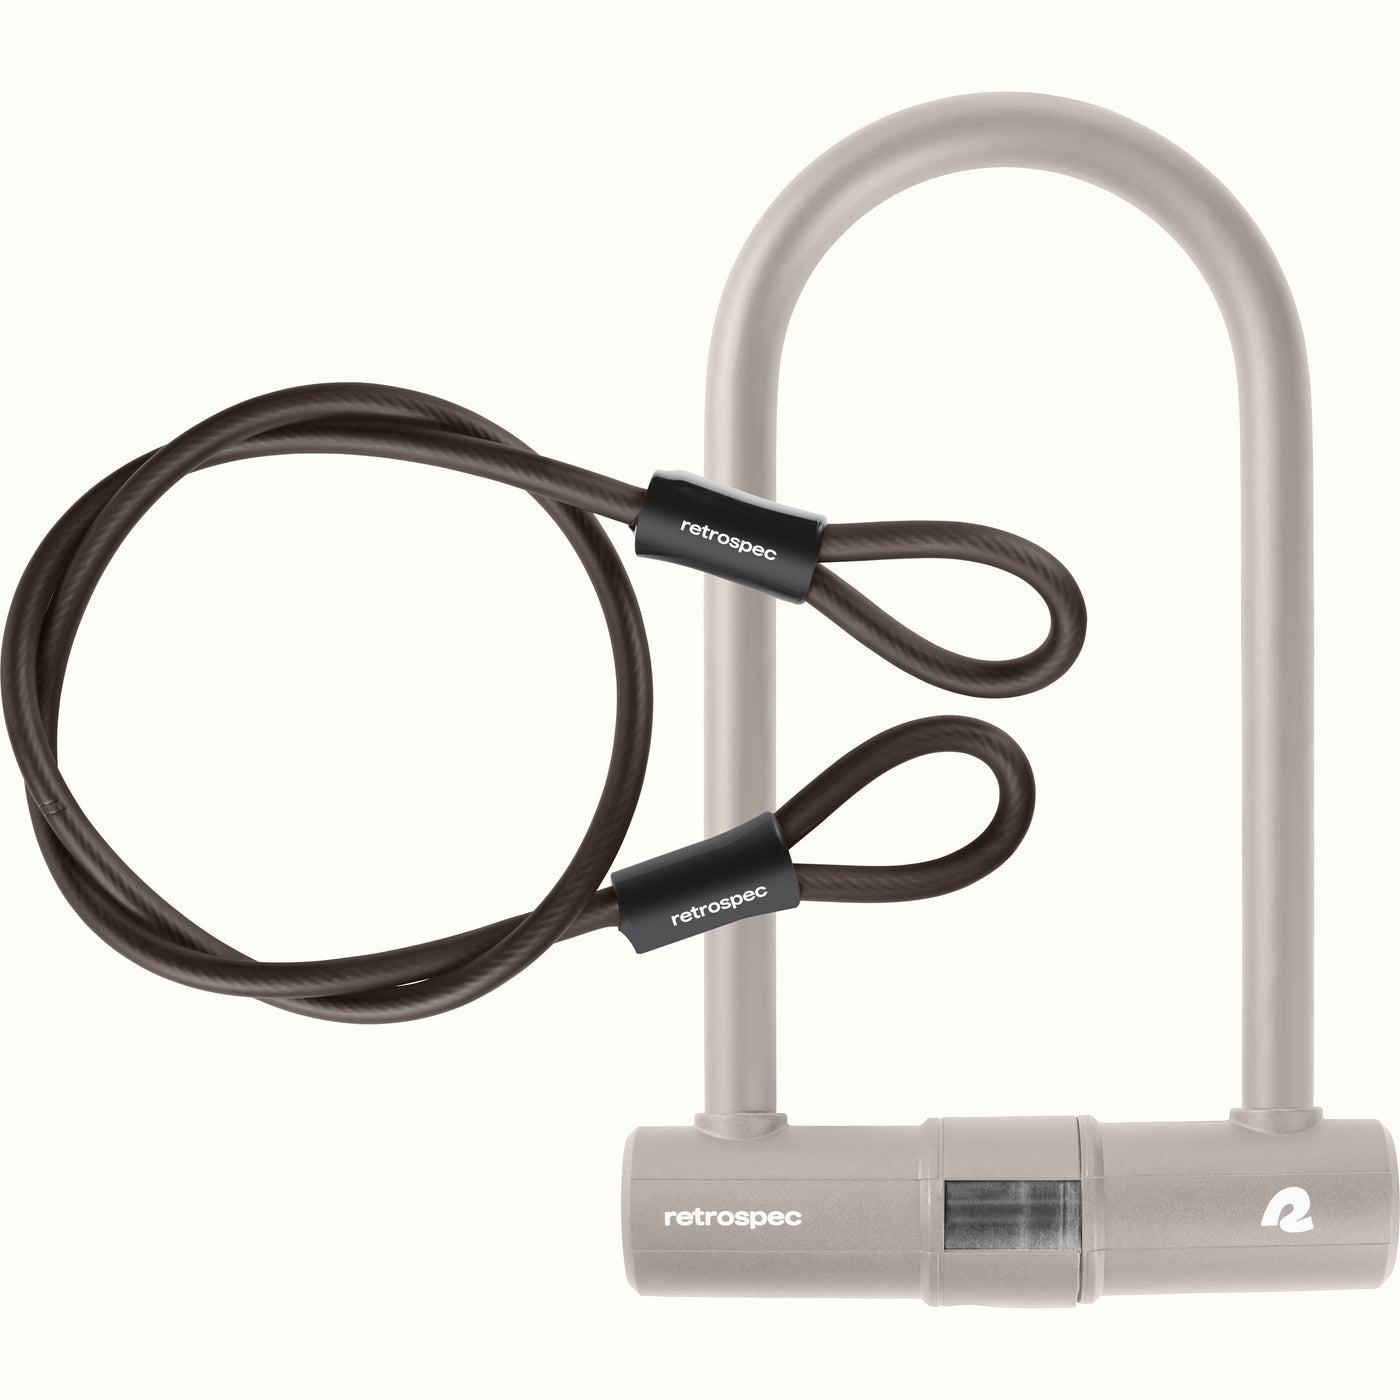 Bike Lock and Cable